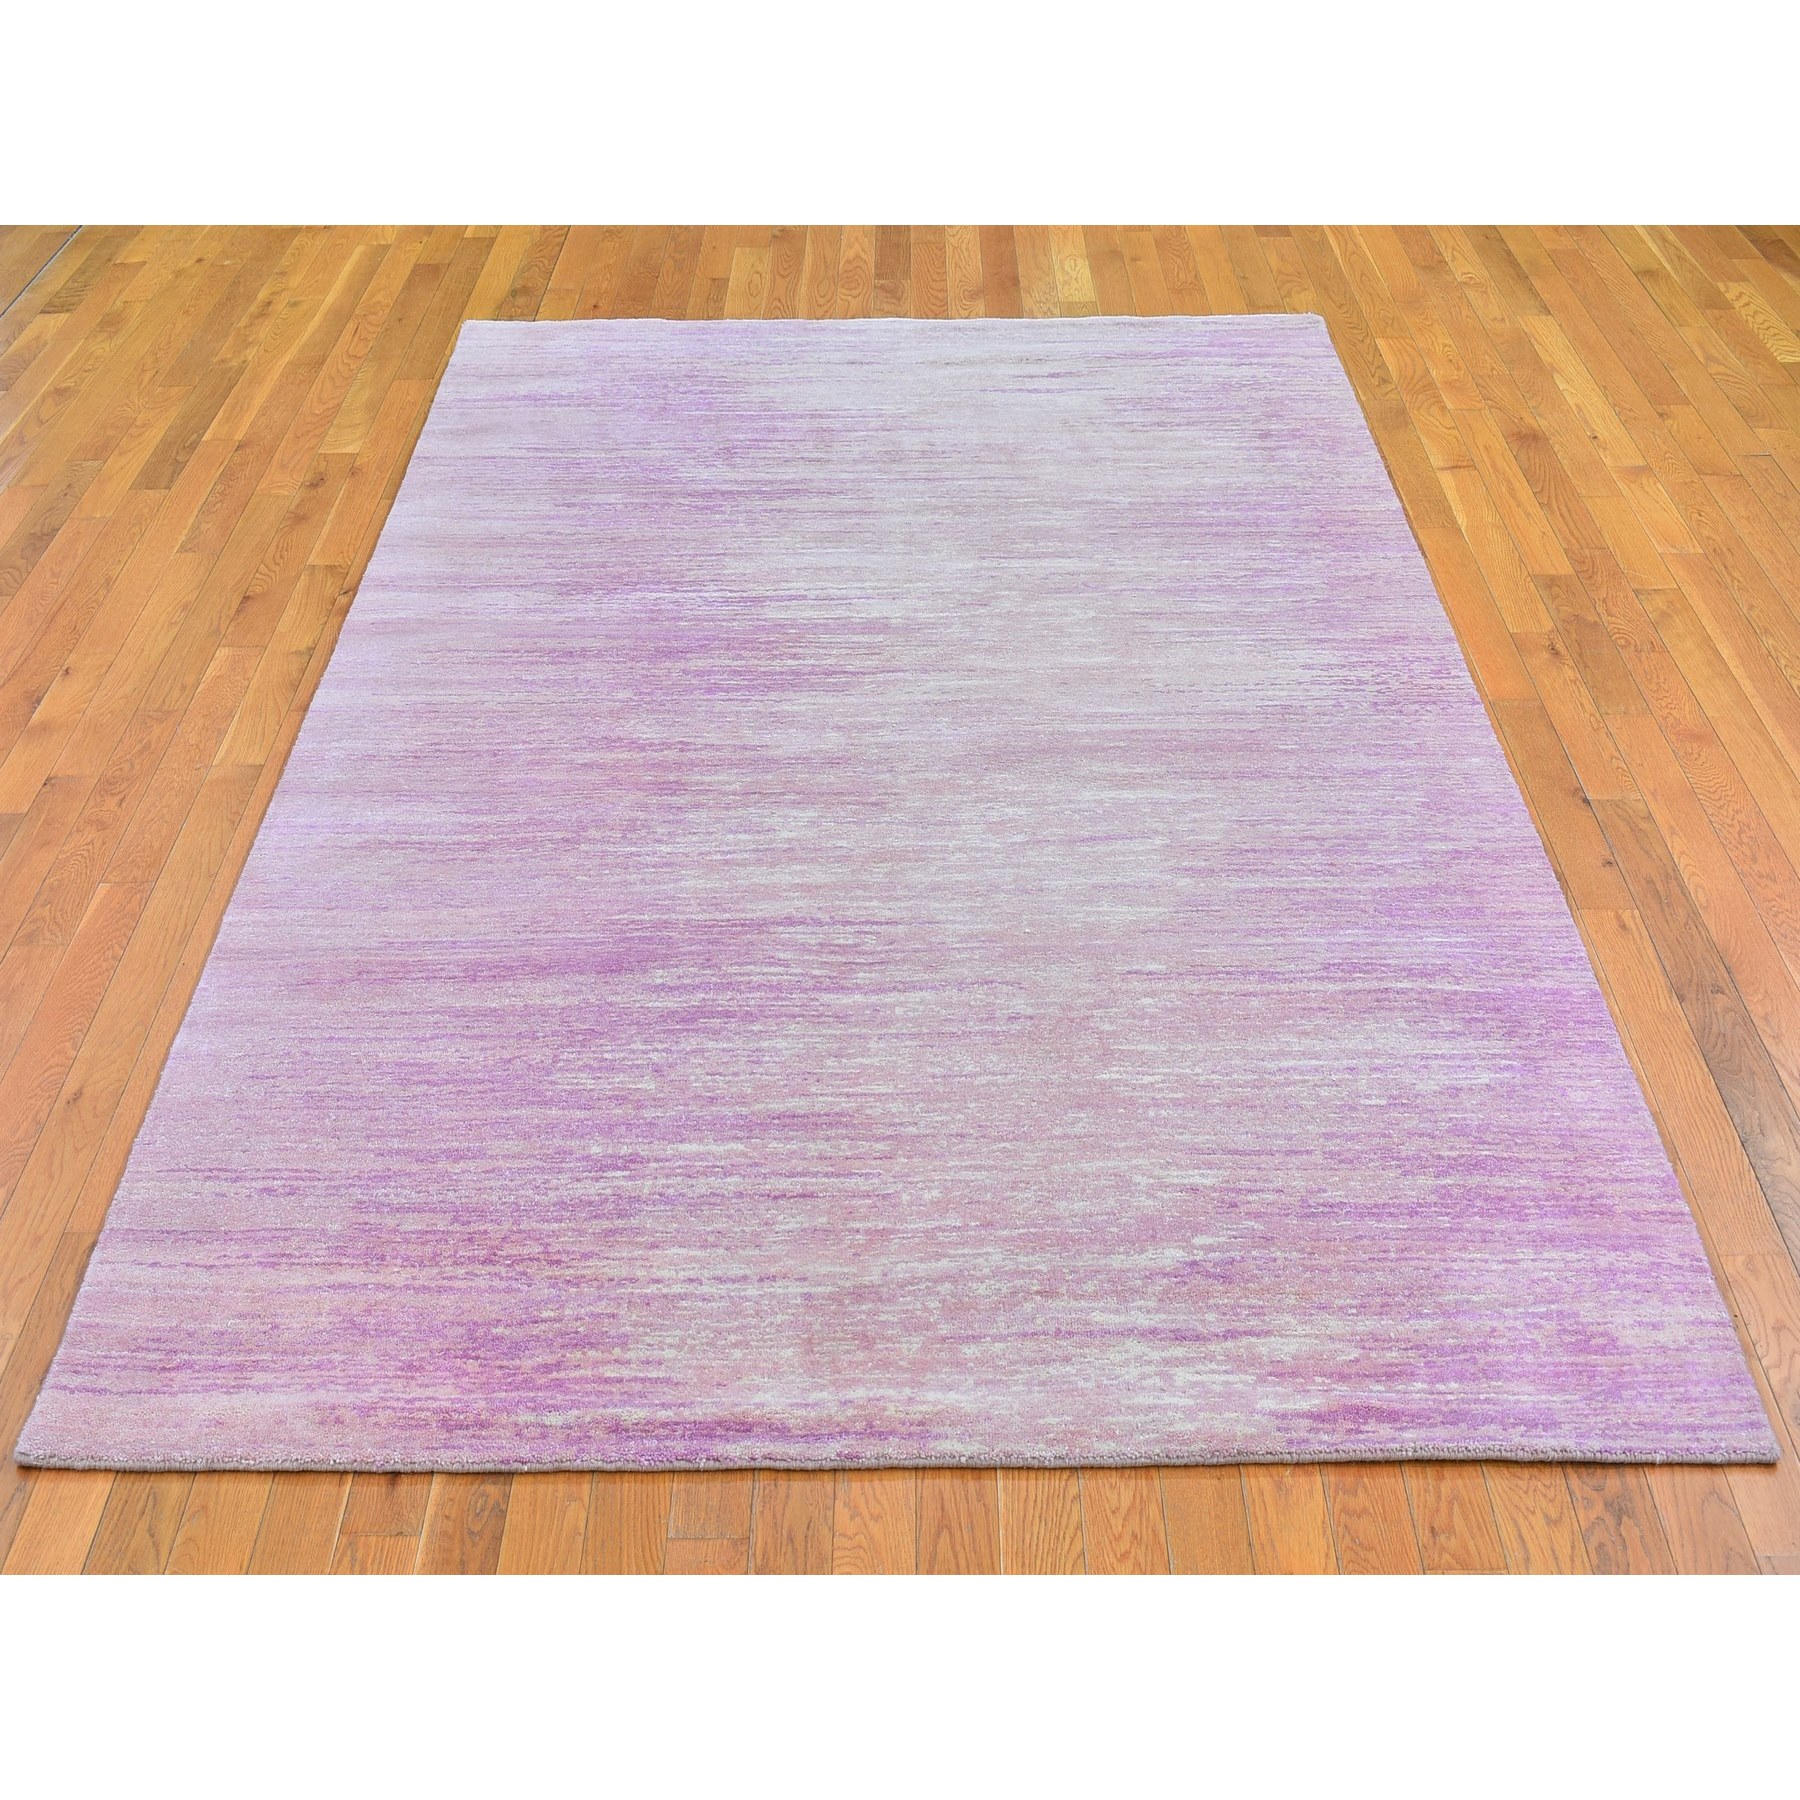 6'1"x9'2" Pink Zero Pile Organic Wool Only Horizontal Ombre Design Hand Woven Oriental Rug 